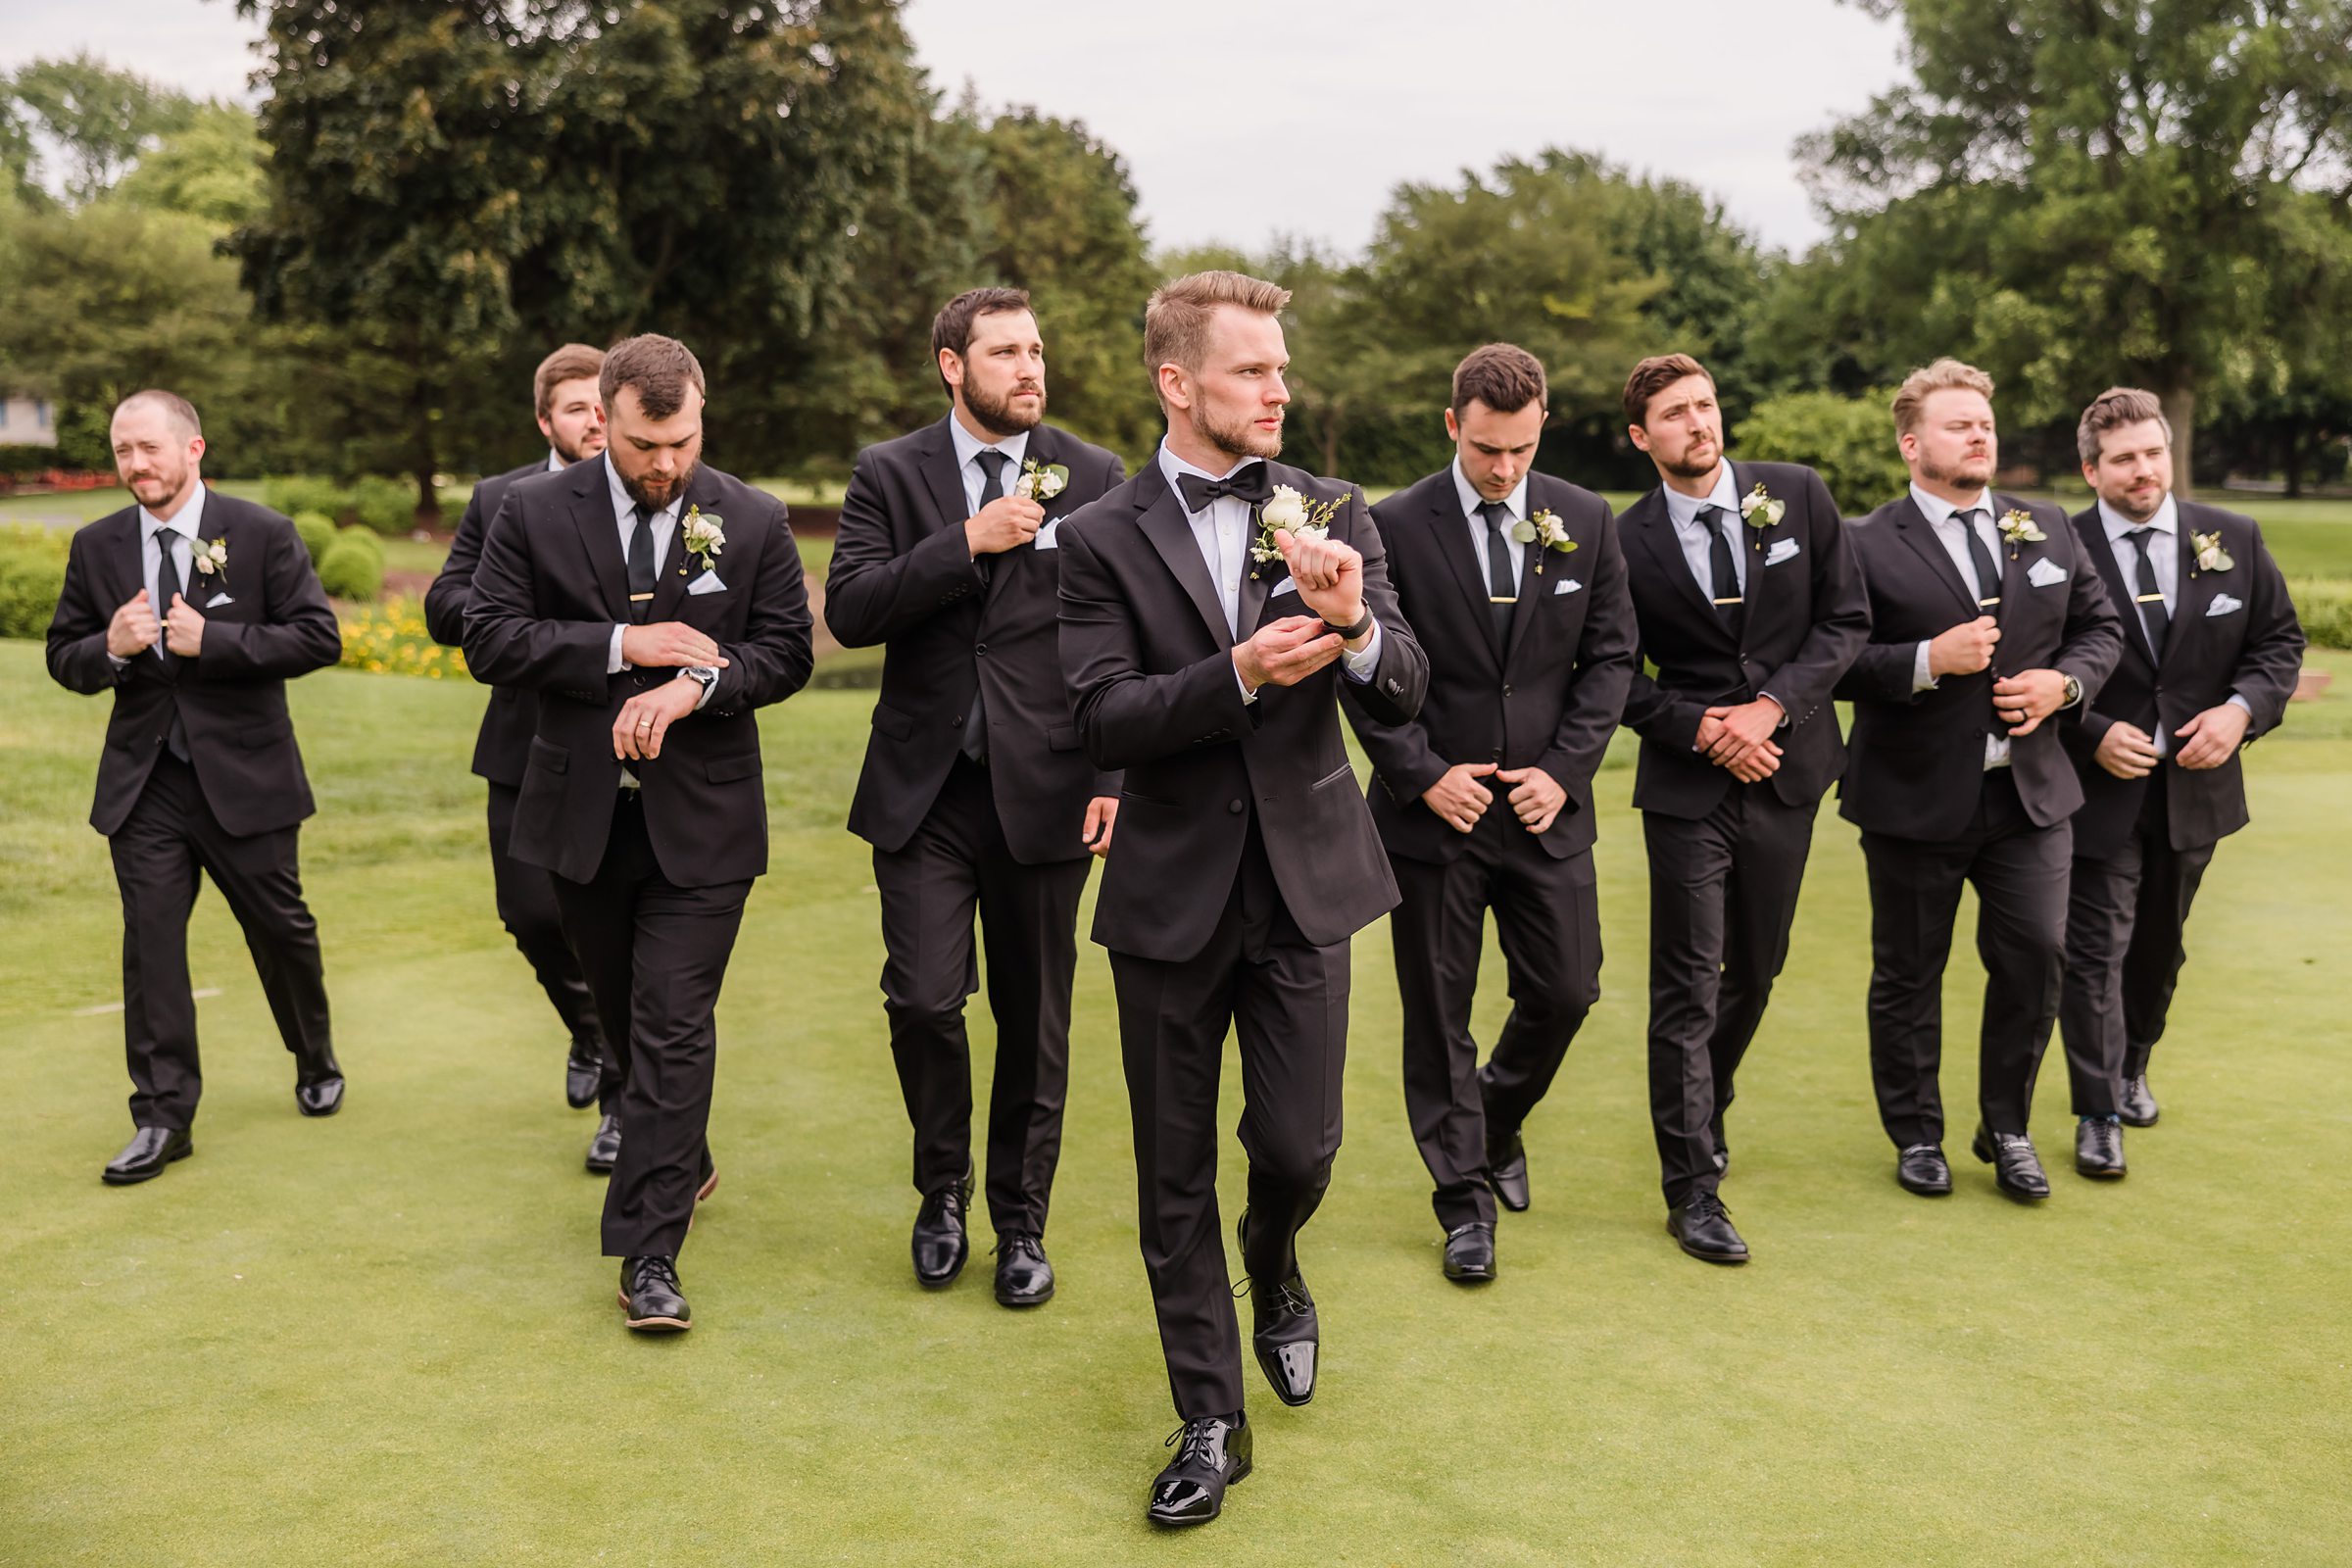 Groom and his groomsmen during his wedding at the Chevy Chase Country Club in Wheeling, Illinois.